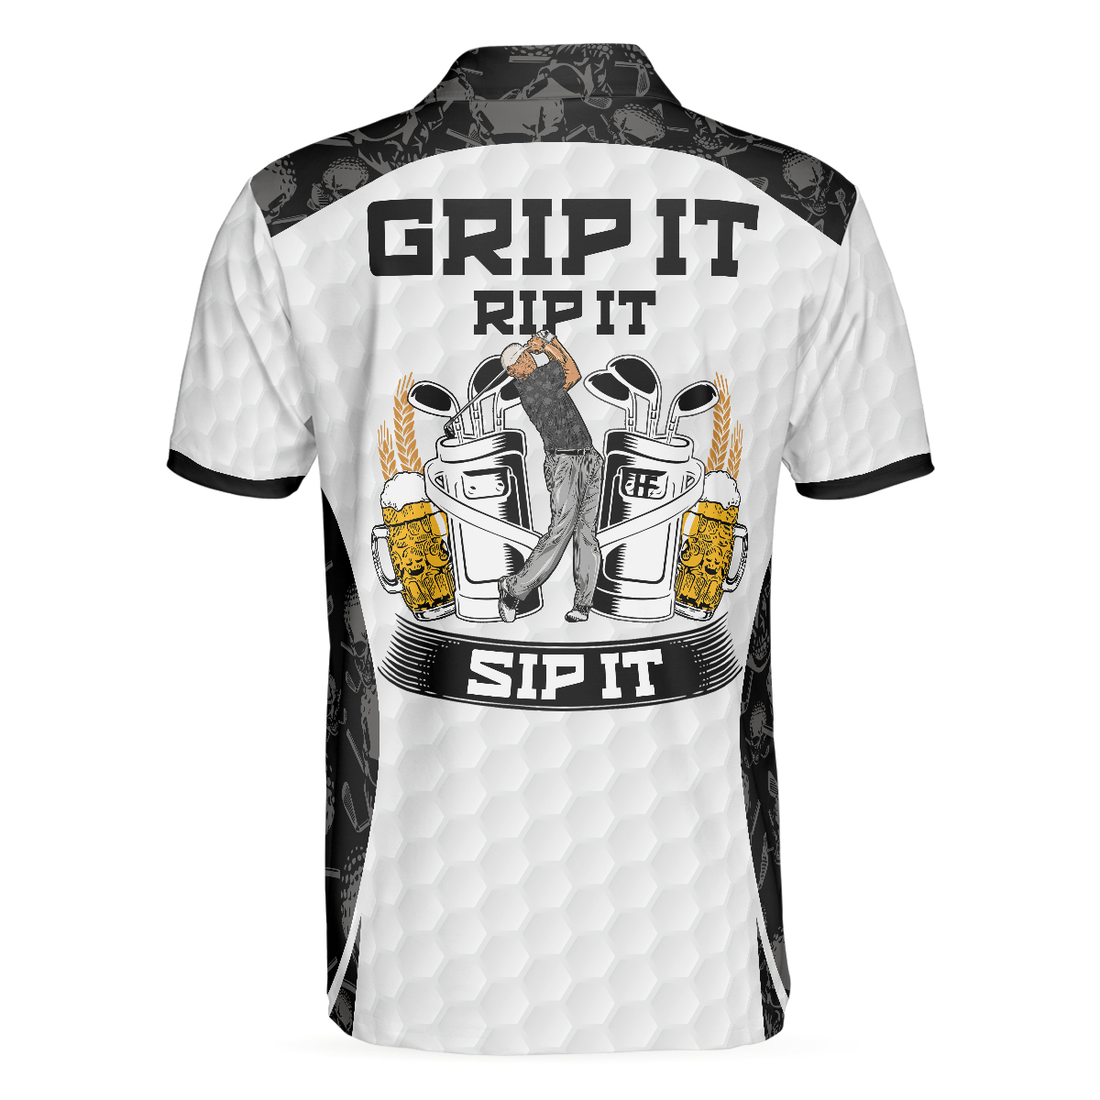 Grip It Rip It Sip It Golf White Polo Shirt Skull Pattern Shirt For Christmas Scary Gift Idea For Golfers - 1